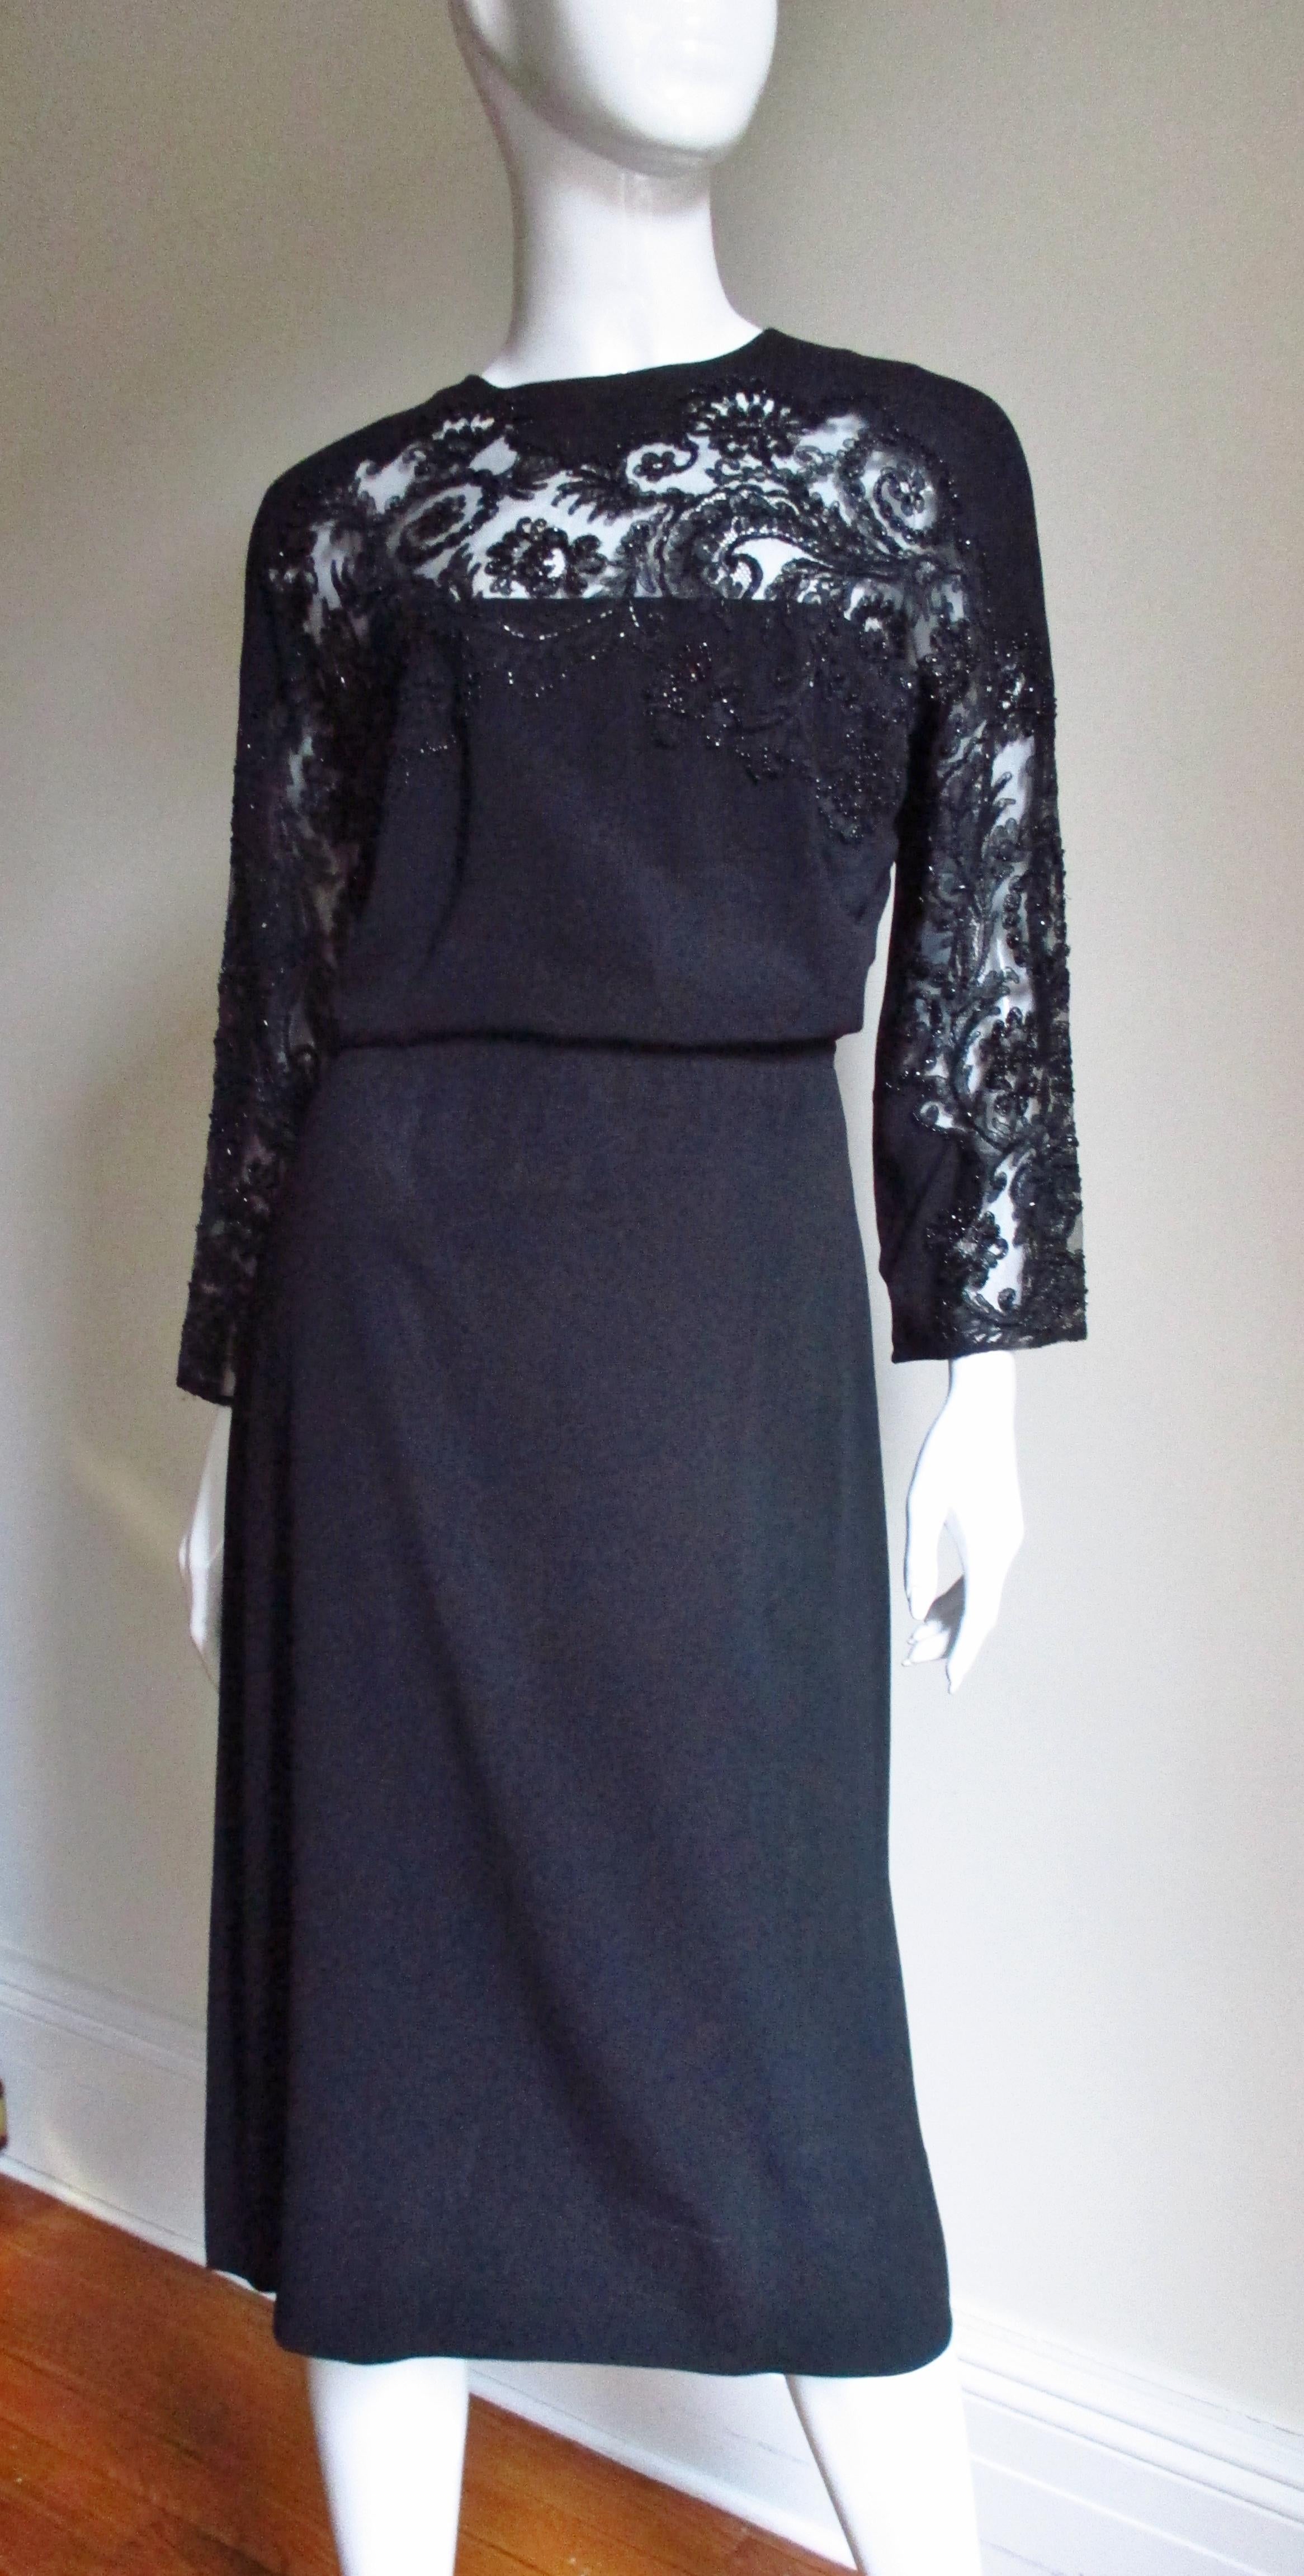 A beautiful black silk 1940s dress by Eisenberg Originals. It has a crew neckline, long sleeves and a stunning richly detailed glass seed beaded lace insert across the upper chest and along the front of the dolman sleeves. The skirt is slightly A